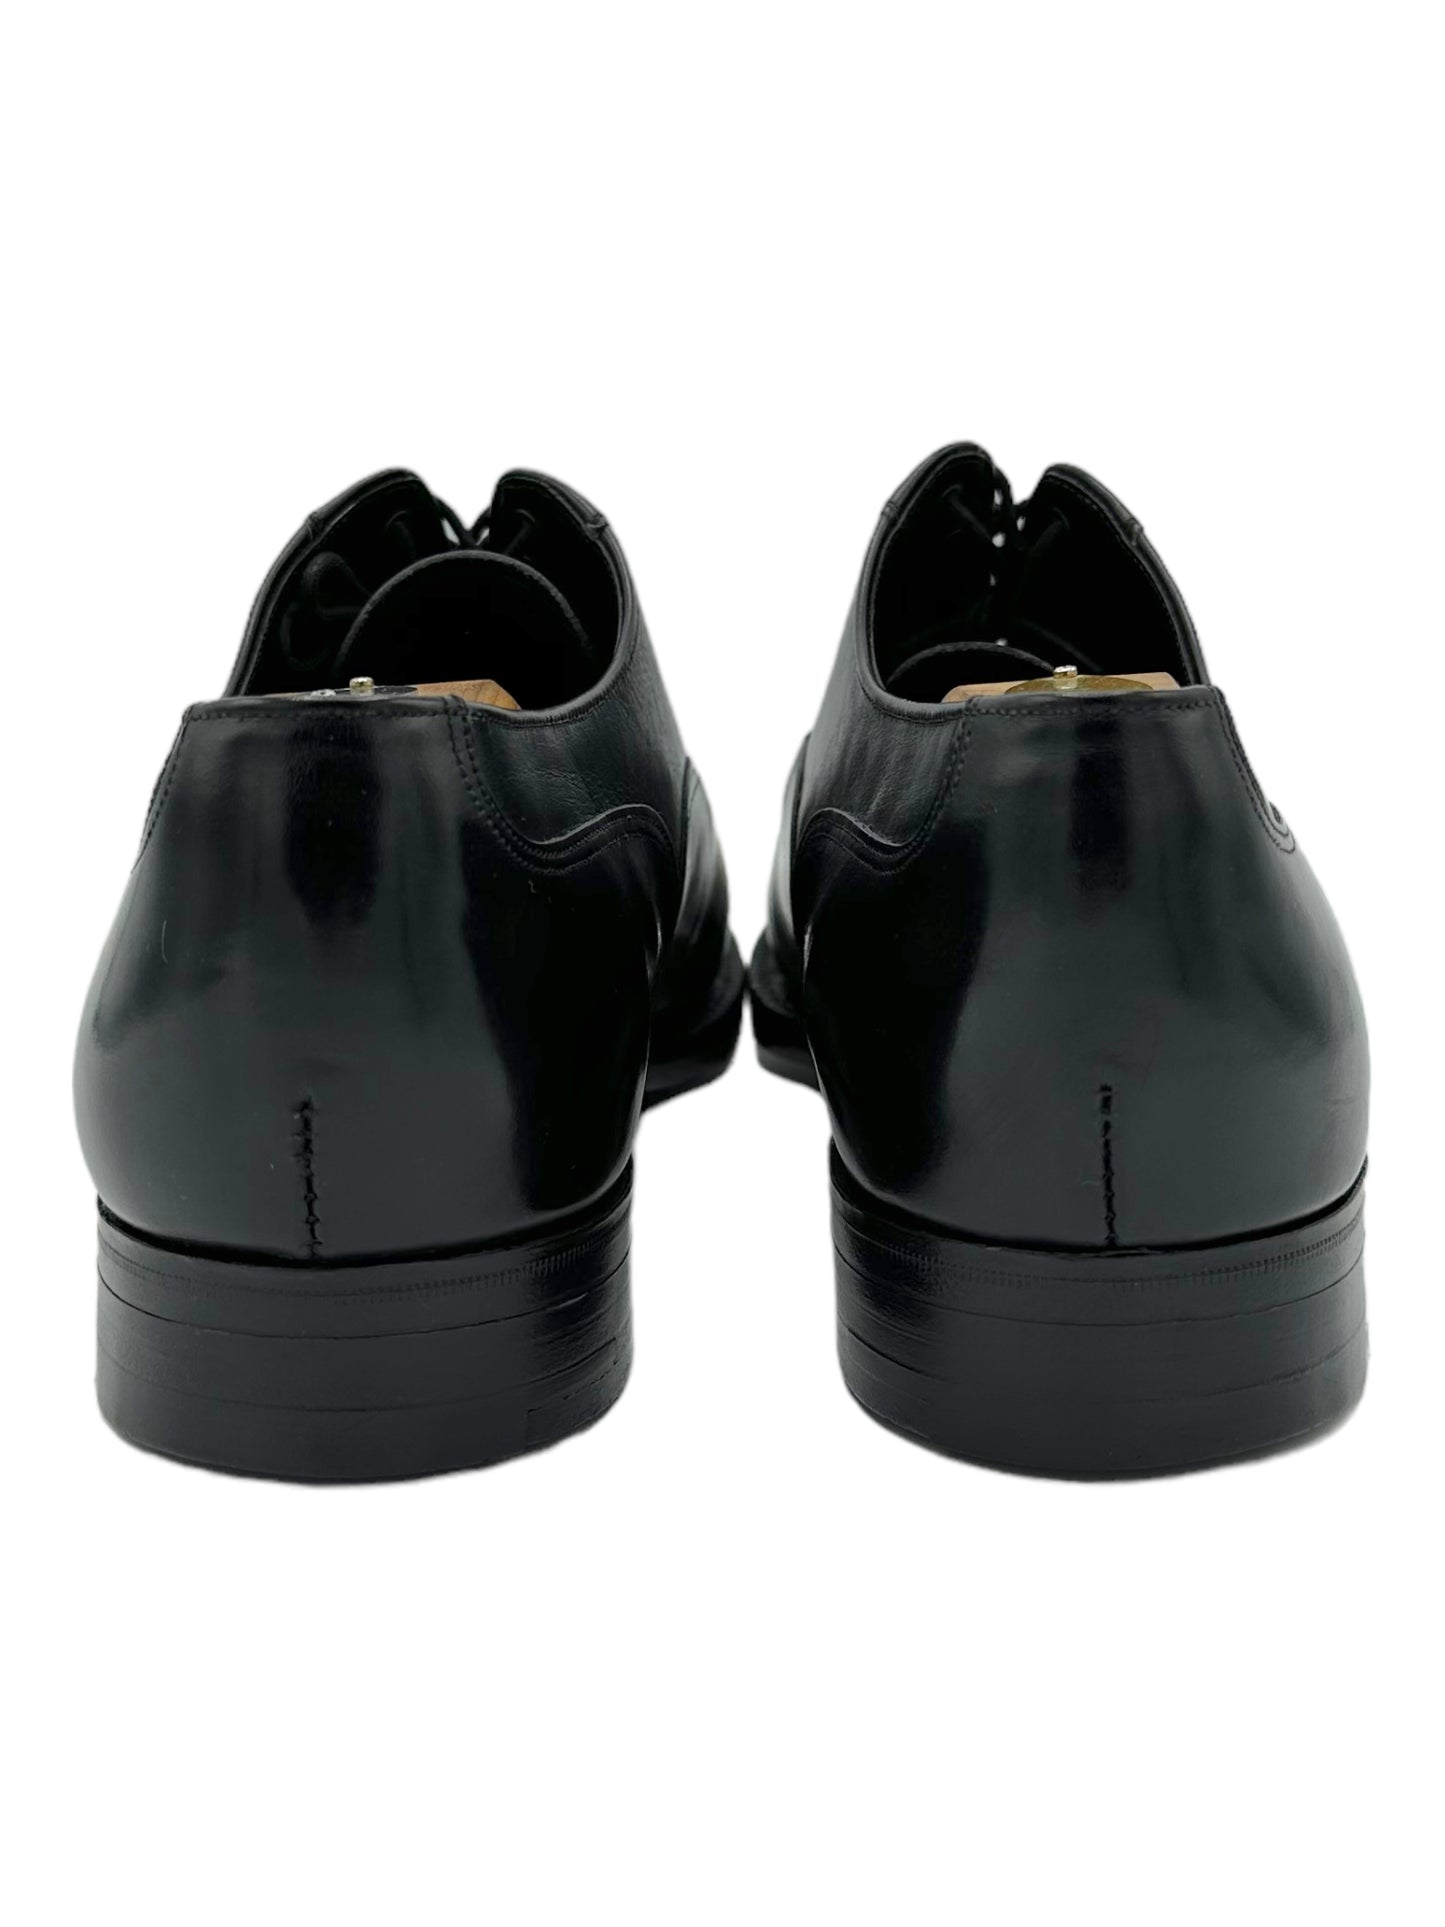 Alfred Sargent Black Cap Toe Oxford Dress Shoes - Genuine Design Luxury Consignment. New & Pre-Owned Clothing, Shoes, & Accessories. Calgary, Canada